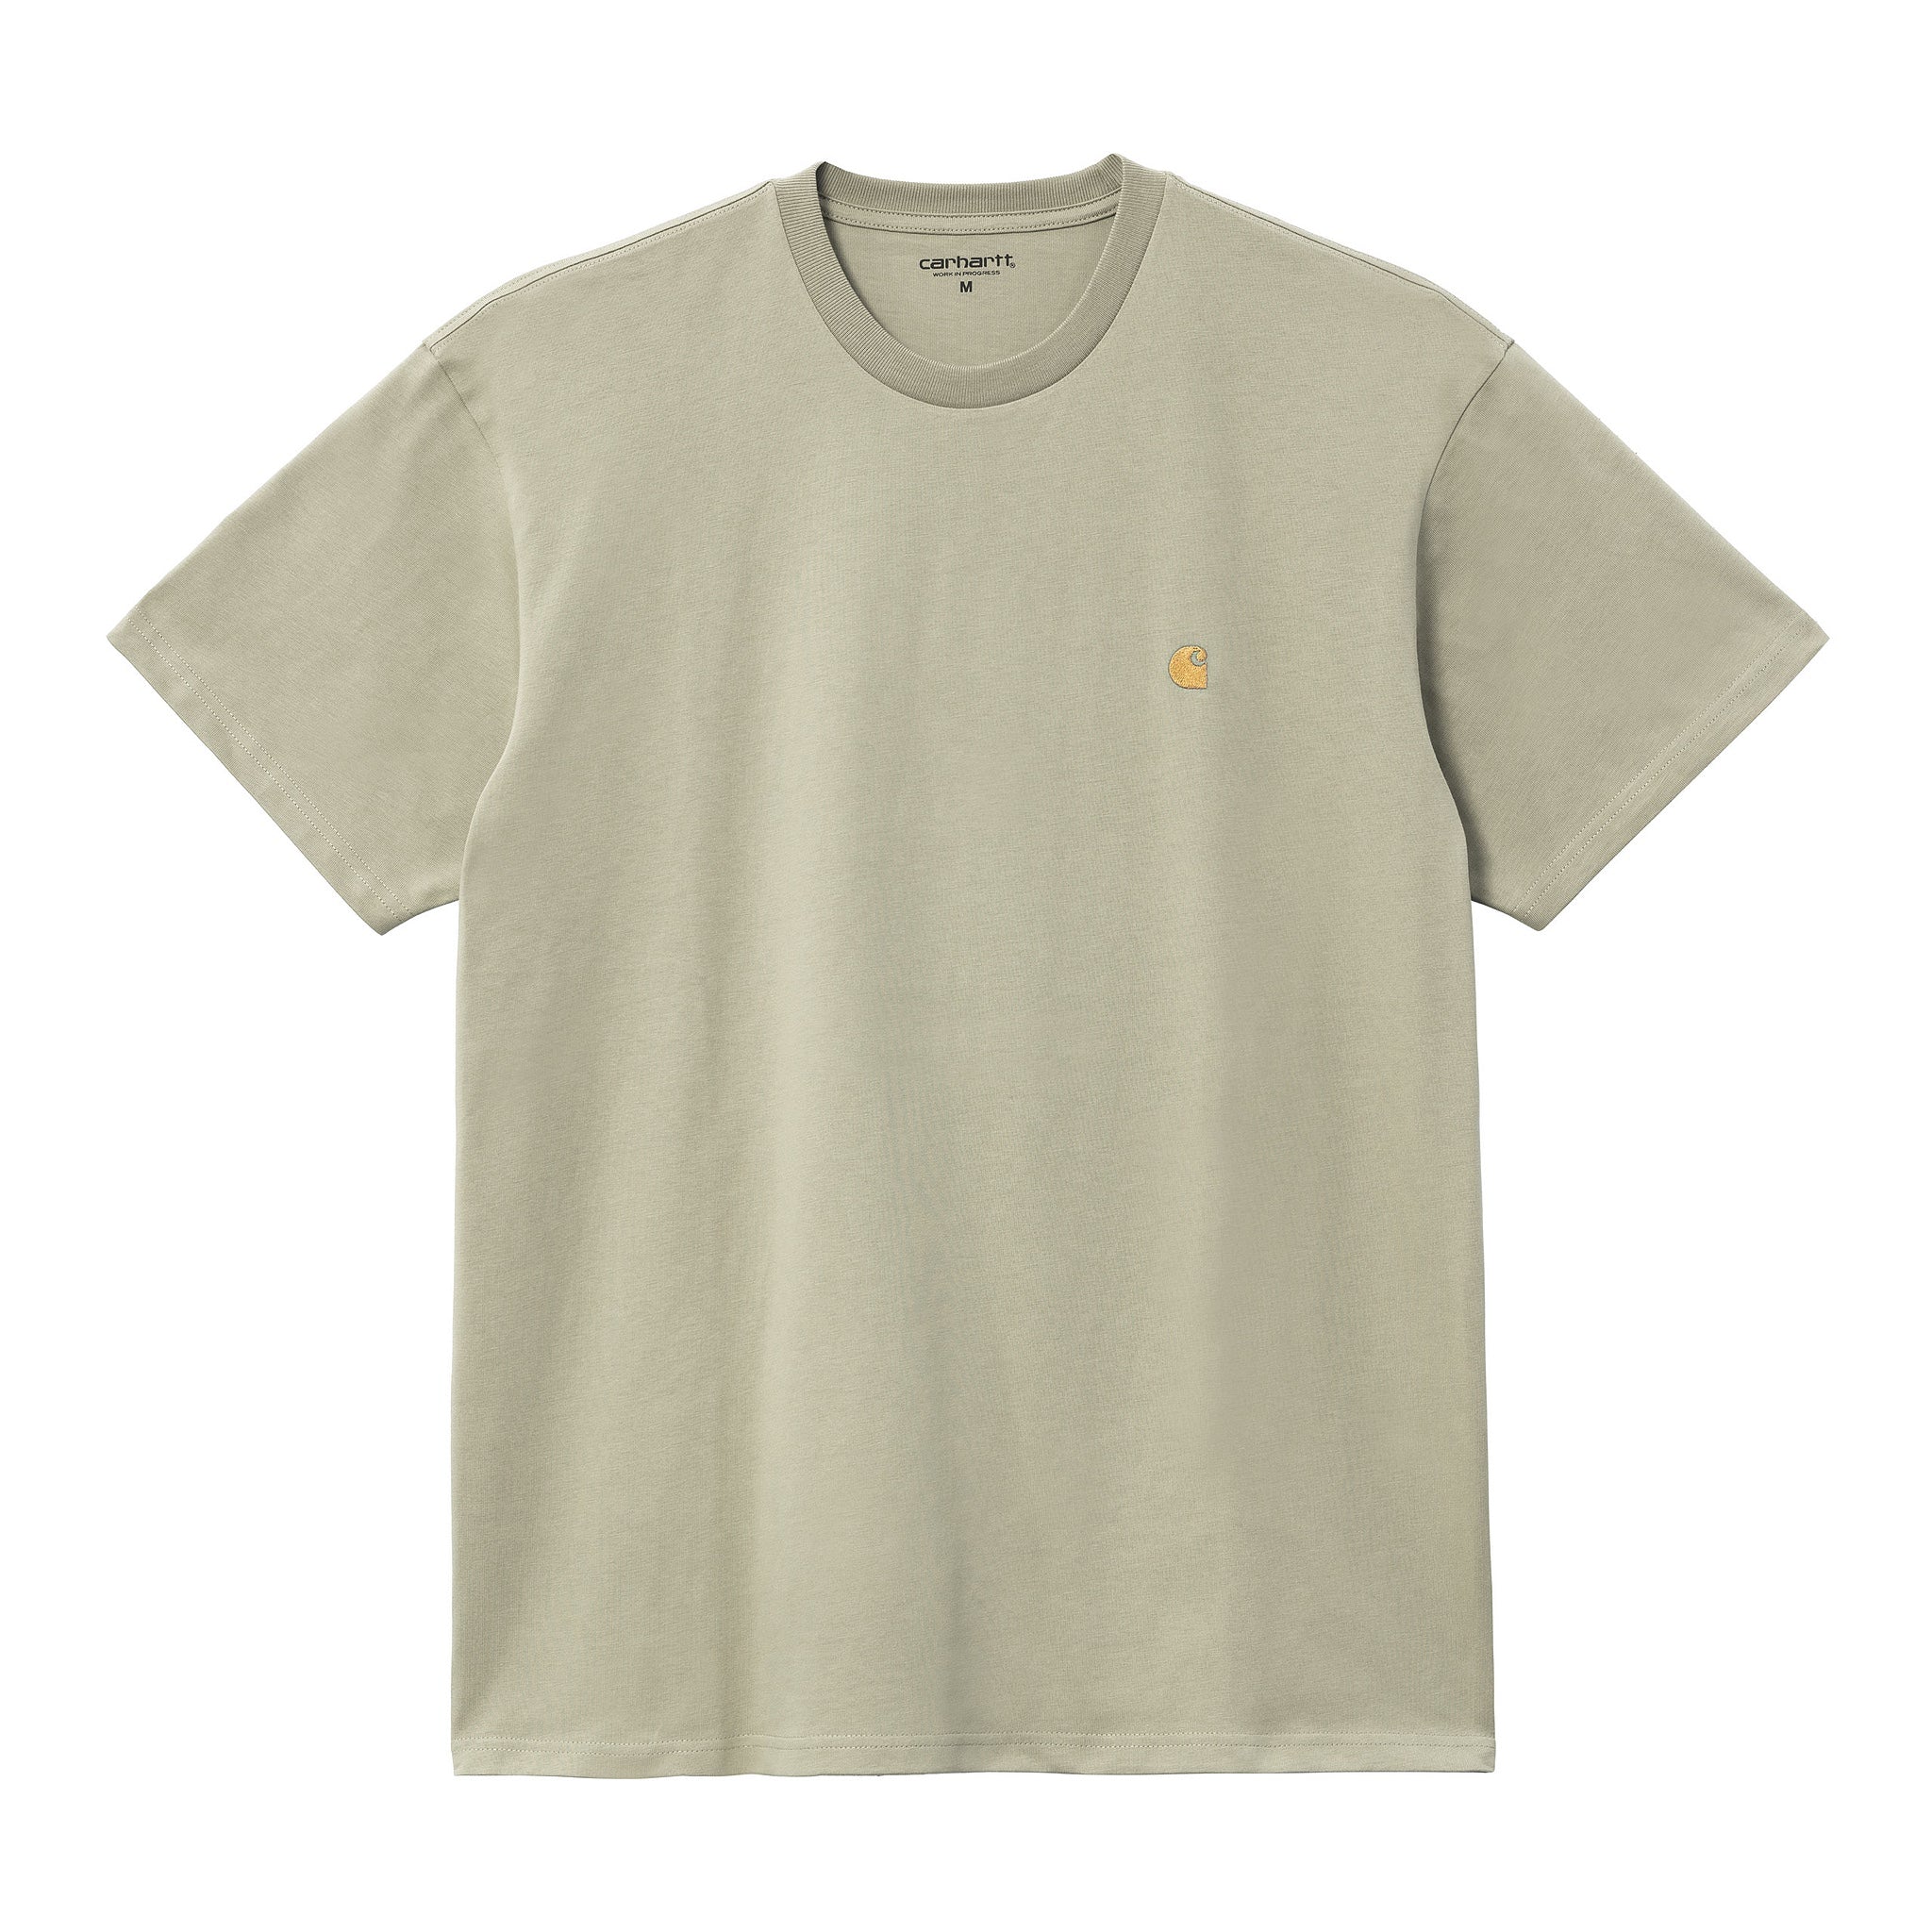 CARHARTT WIP - S/S CHASE T-SHIRT AGAVE / GOLD